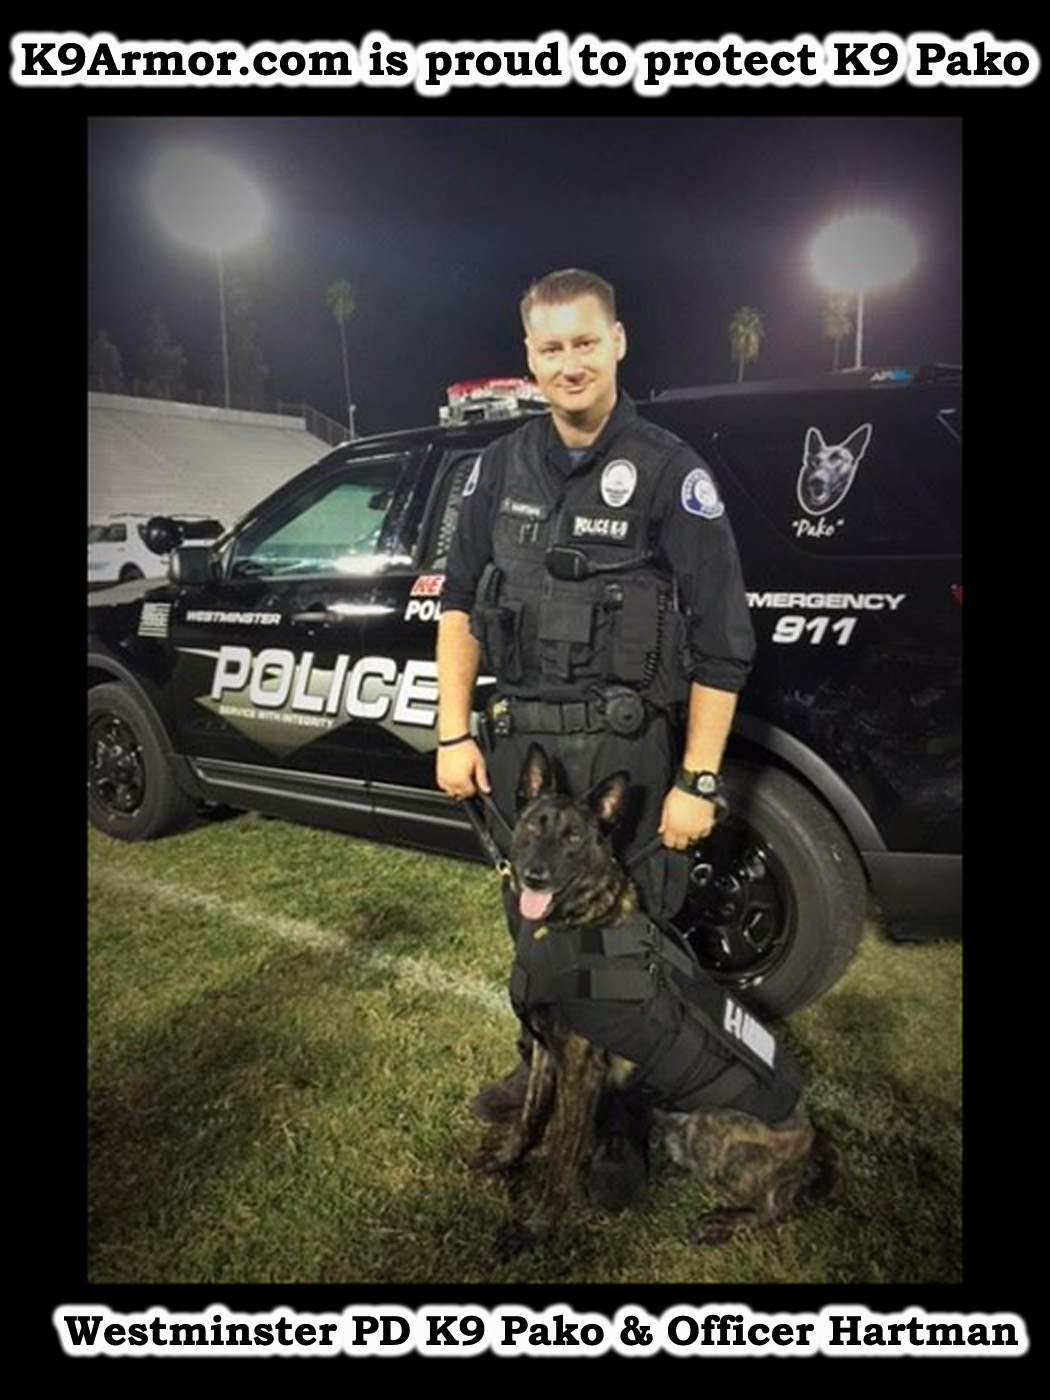 Westminster PD K9 Pako and Officer Hartman photo by Frank DAmato OC Register